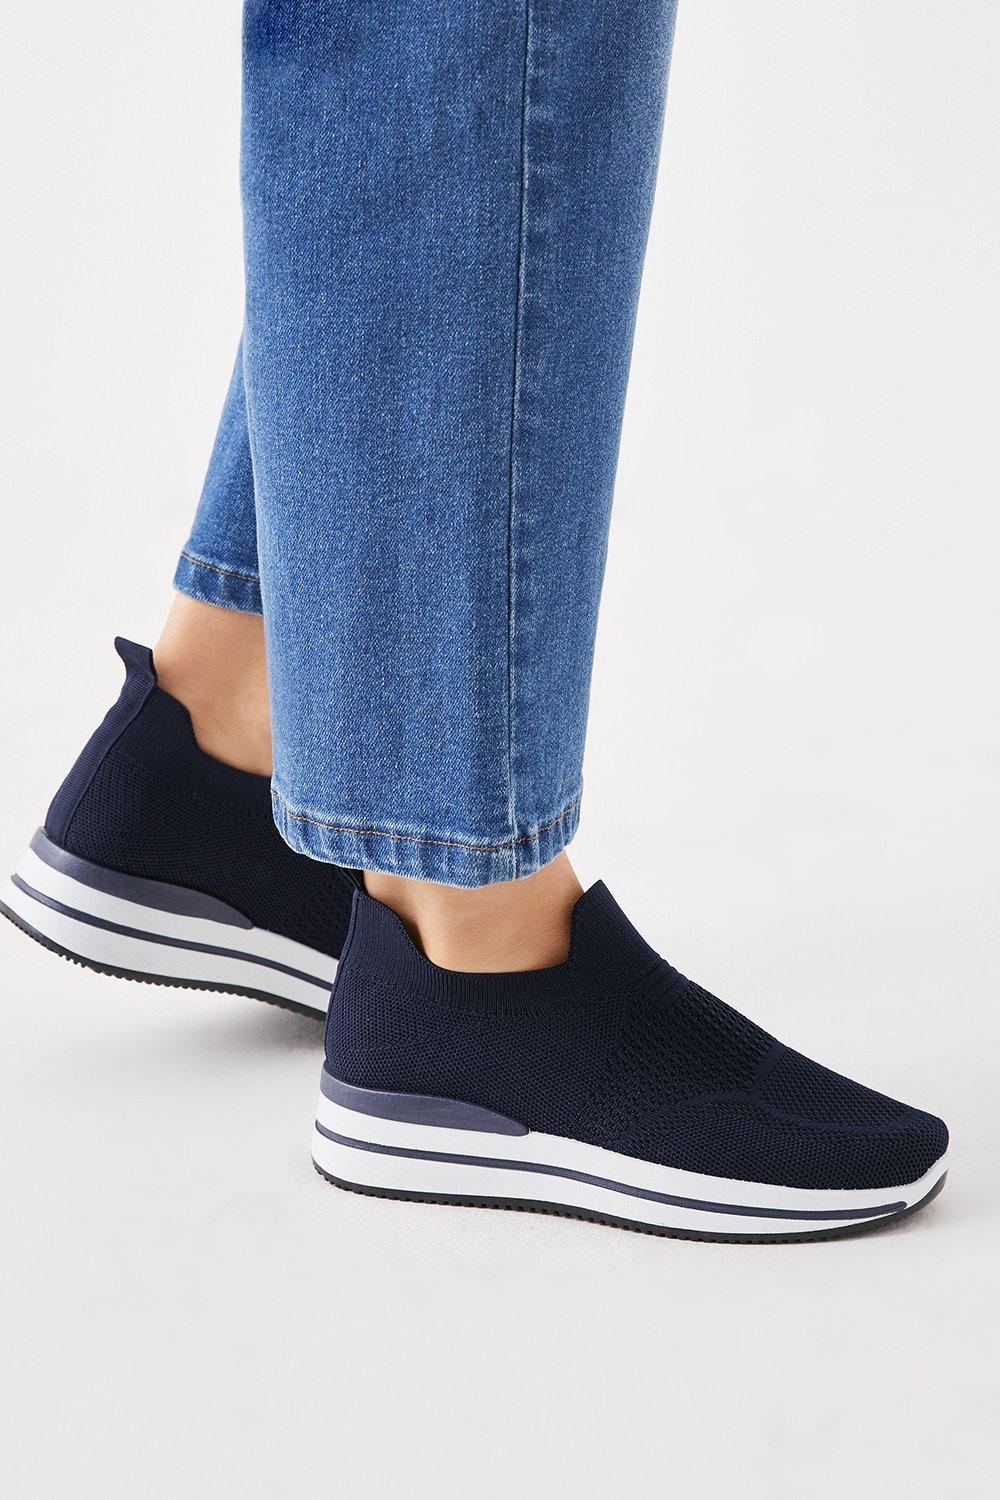 Women’s Good For The Sole: Naomi Wide Fit Comfort Trainers - navy - 8